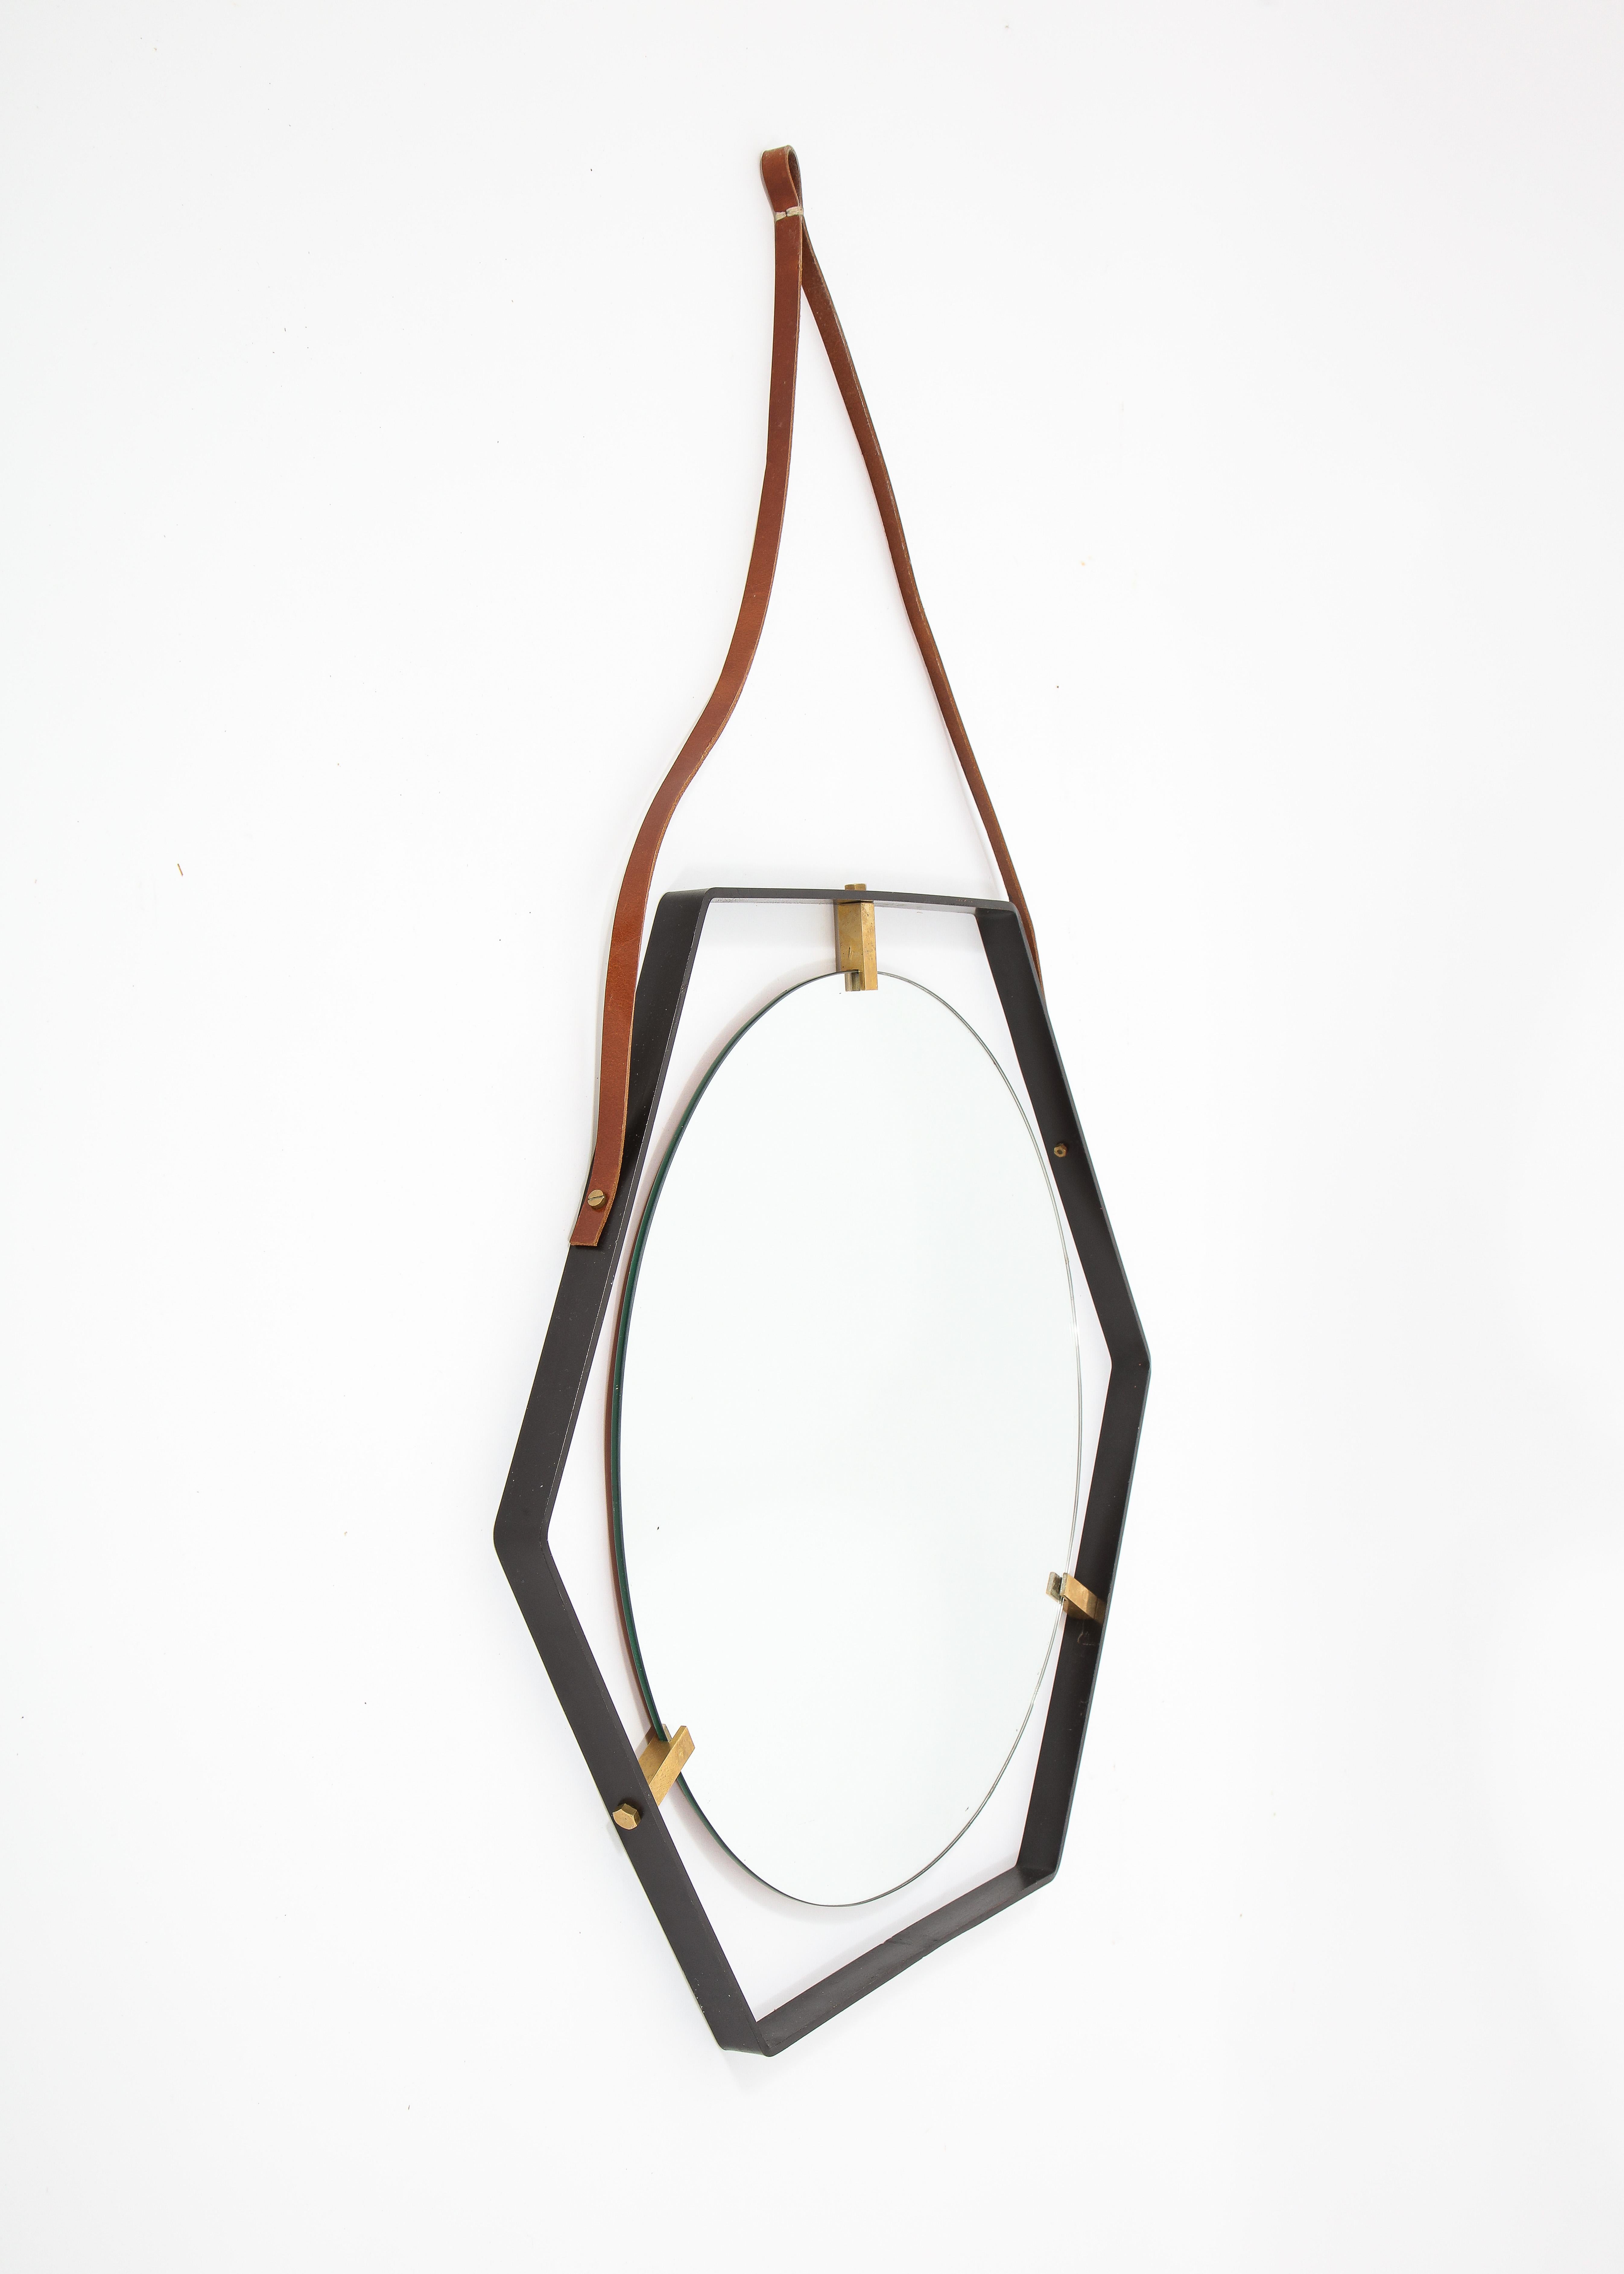 Elegant octagonal mirror with brass supports in a wrought iron frame and hung by a leather belt.